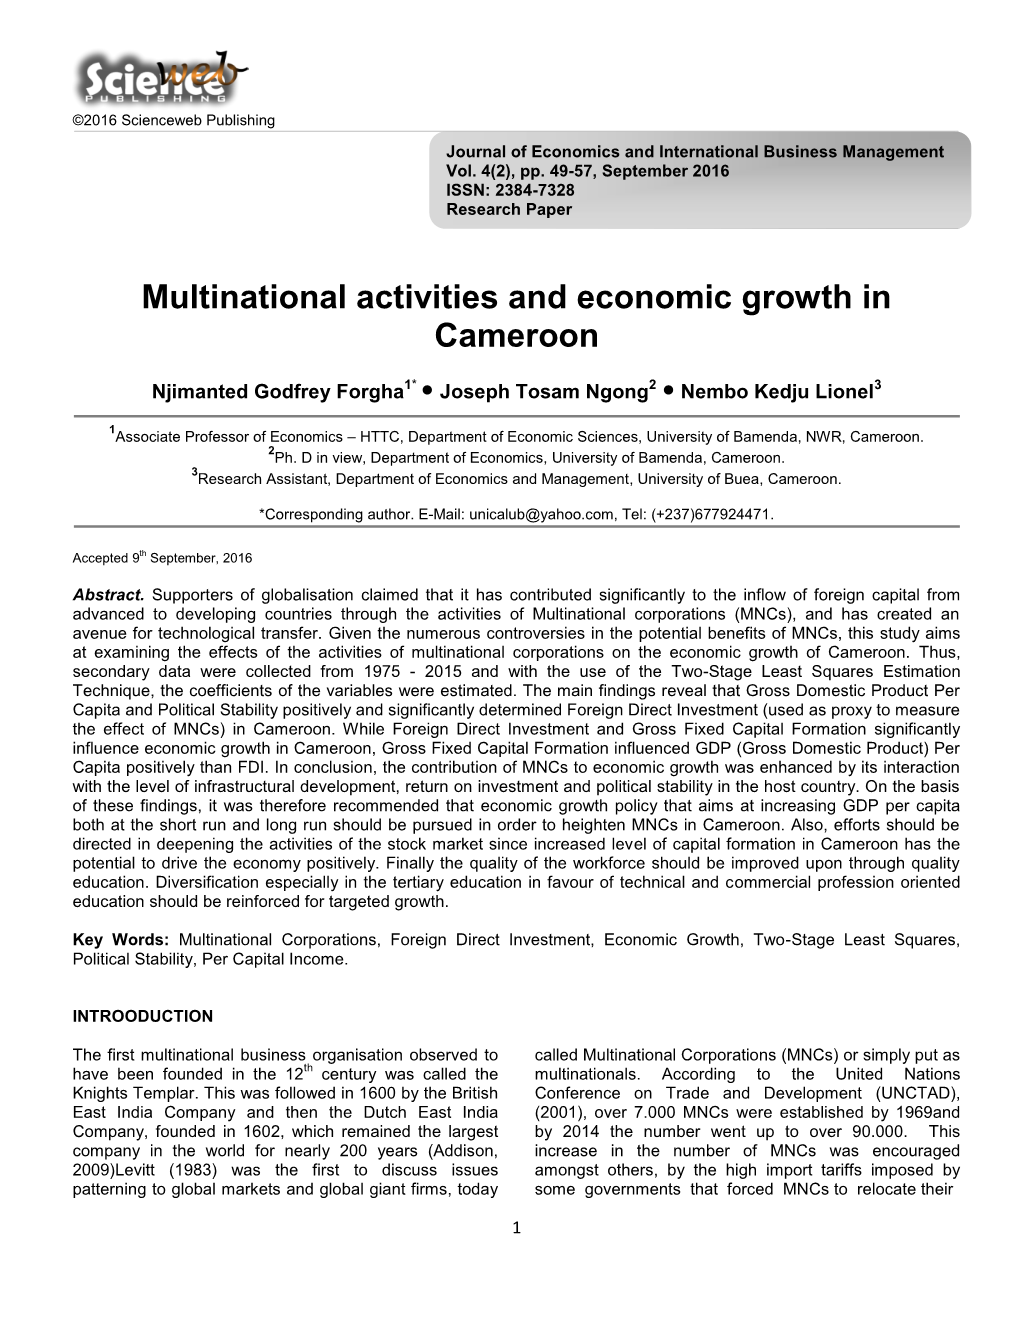 Multinational Activities and Economic Growth in Cameroon